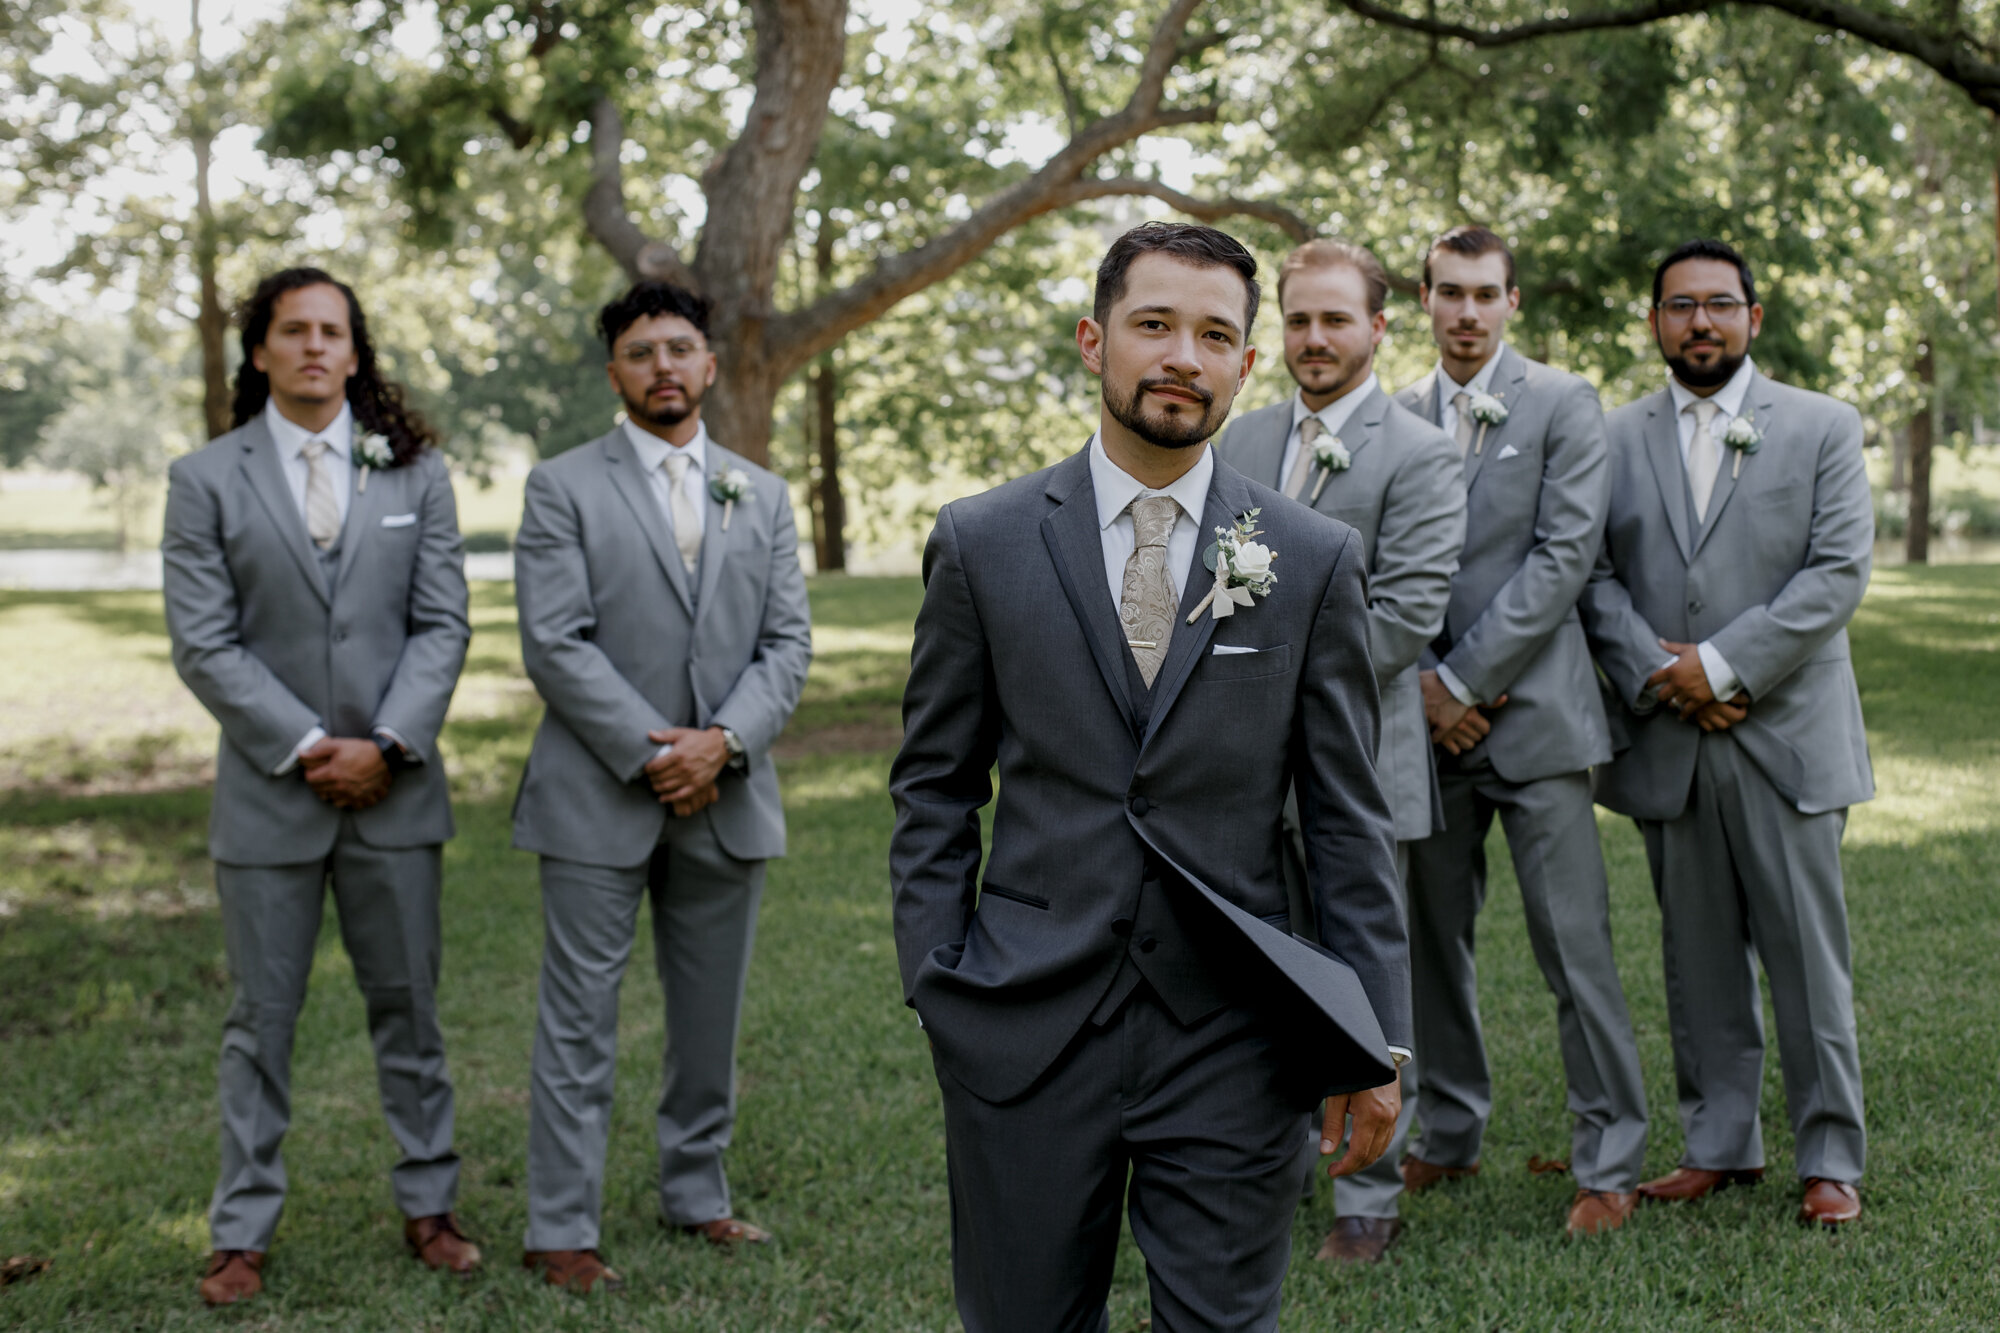 Groom and groomsmen portraits. Glowing Wedding in Golden Champagne Tones at The Orchard at Caney Creek in Wharton, TX